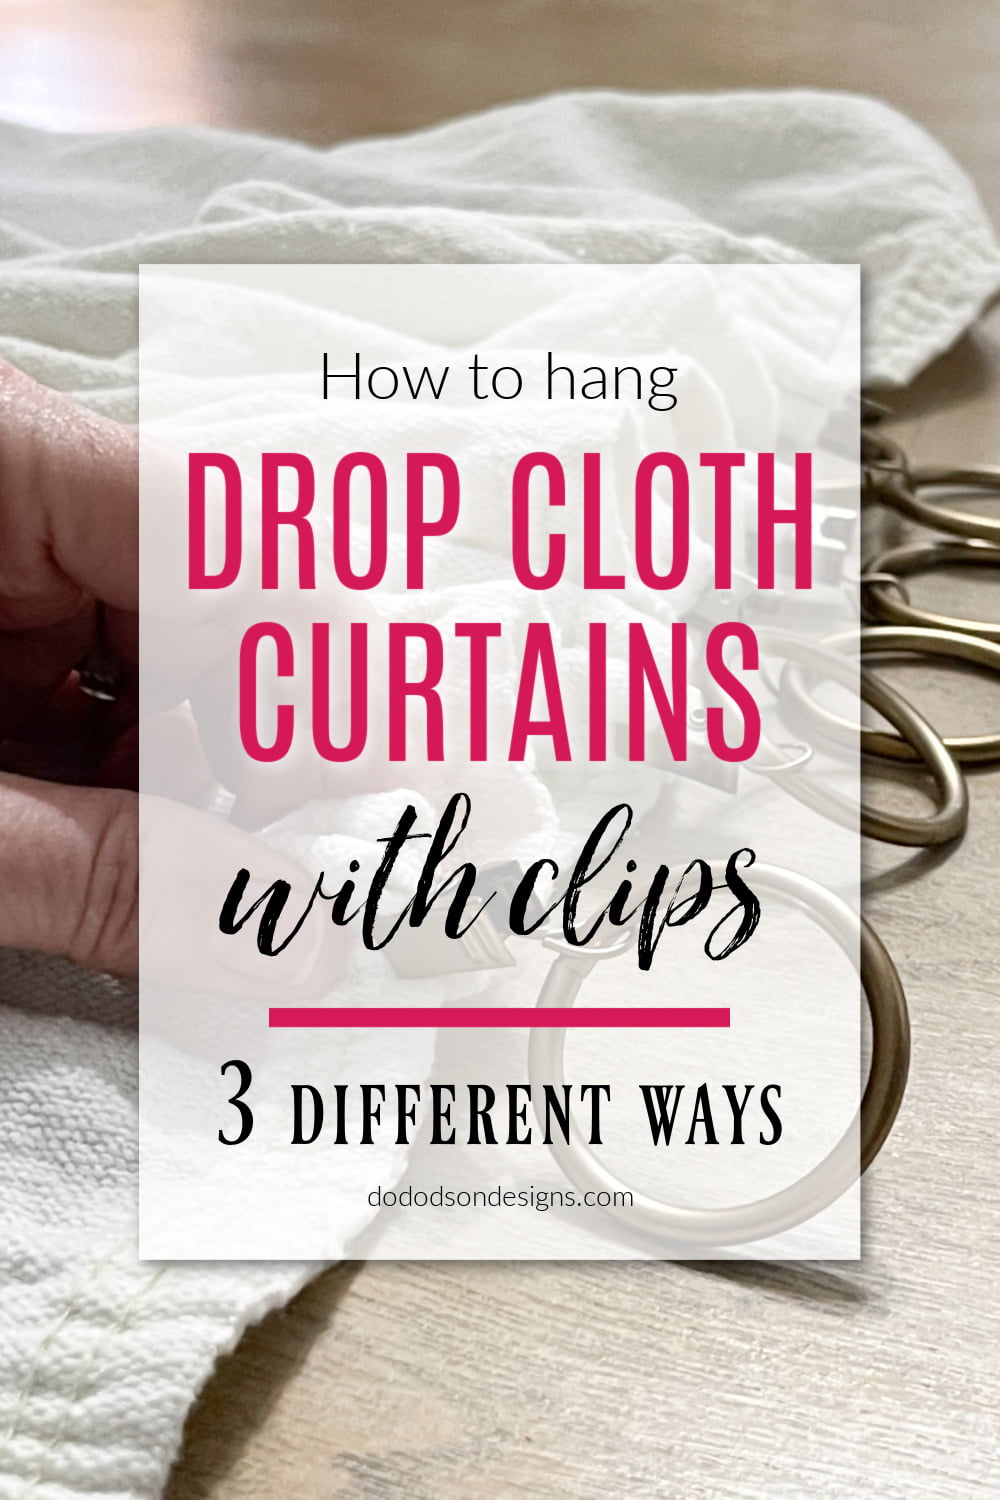 How To Hang Drop Cloth Curtains With Clips